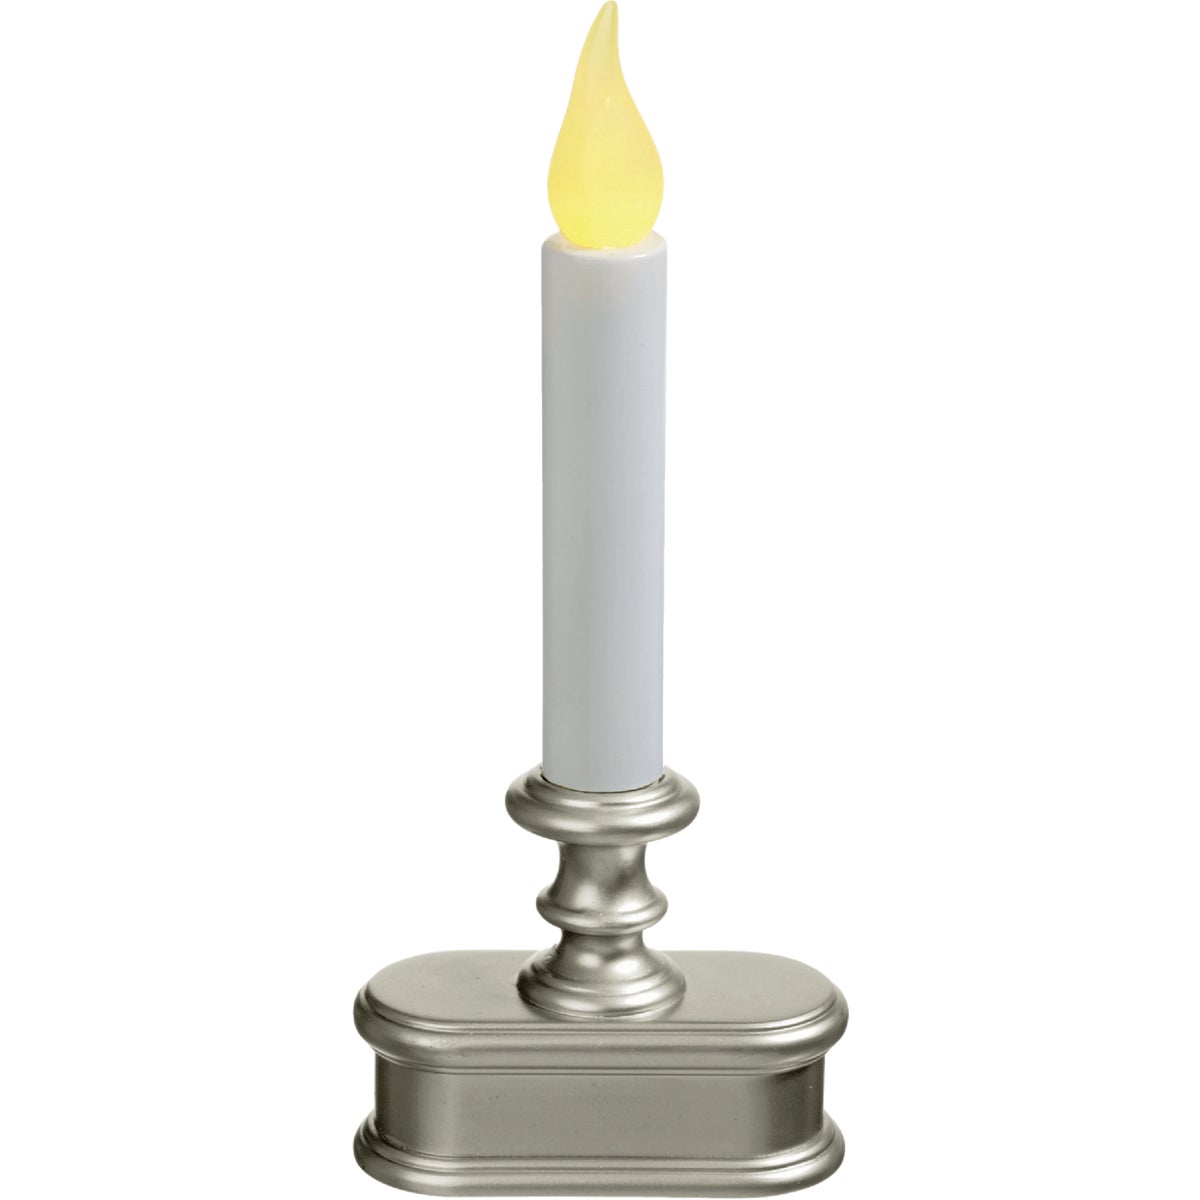 Item 900096, Standard battery candle with realistic flickering flame.